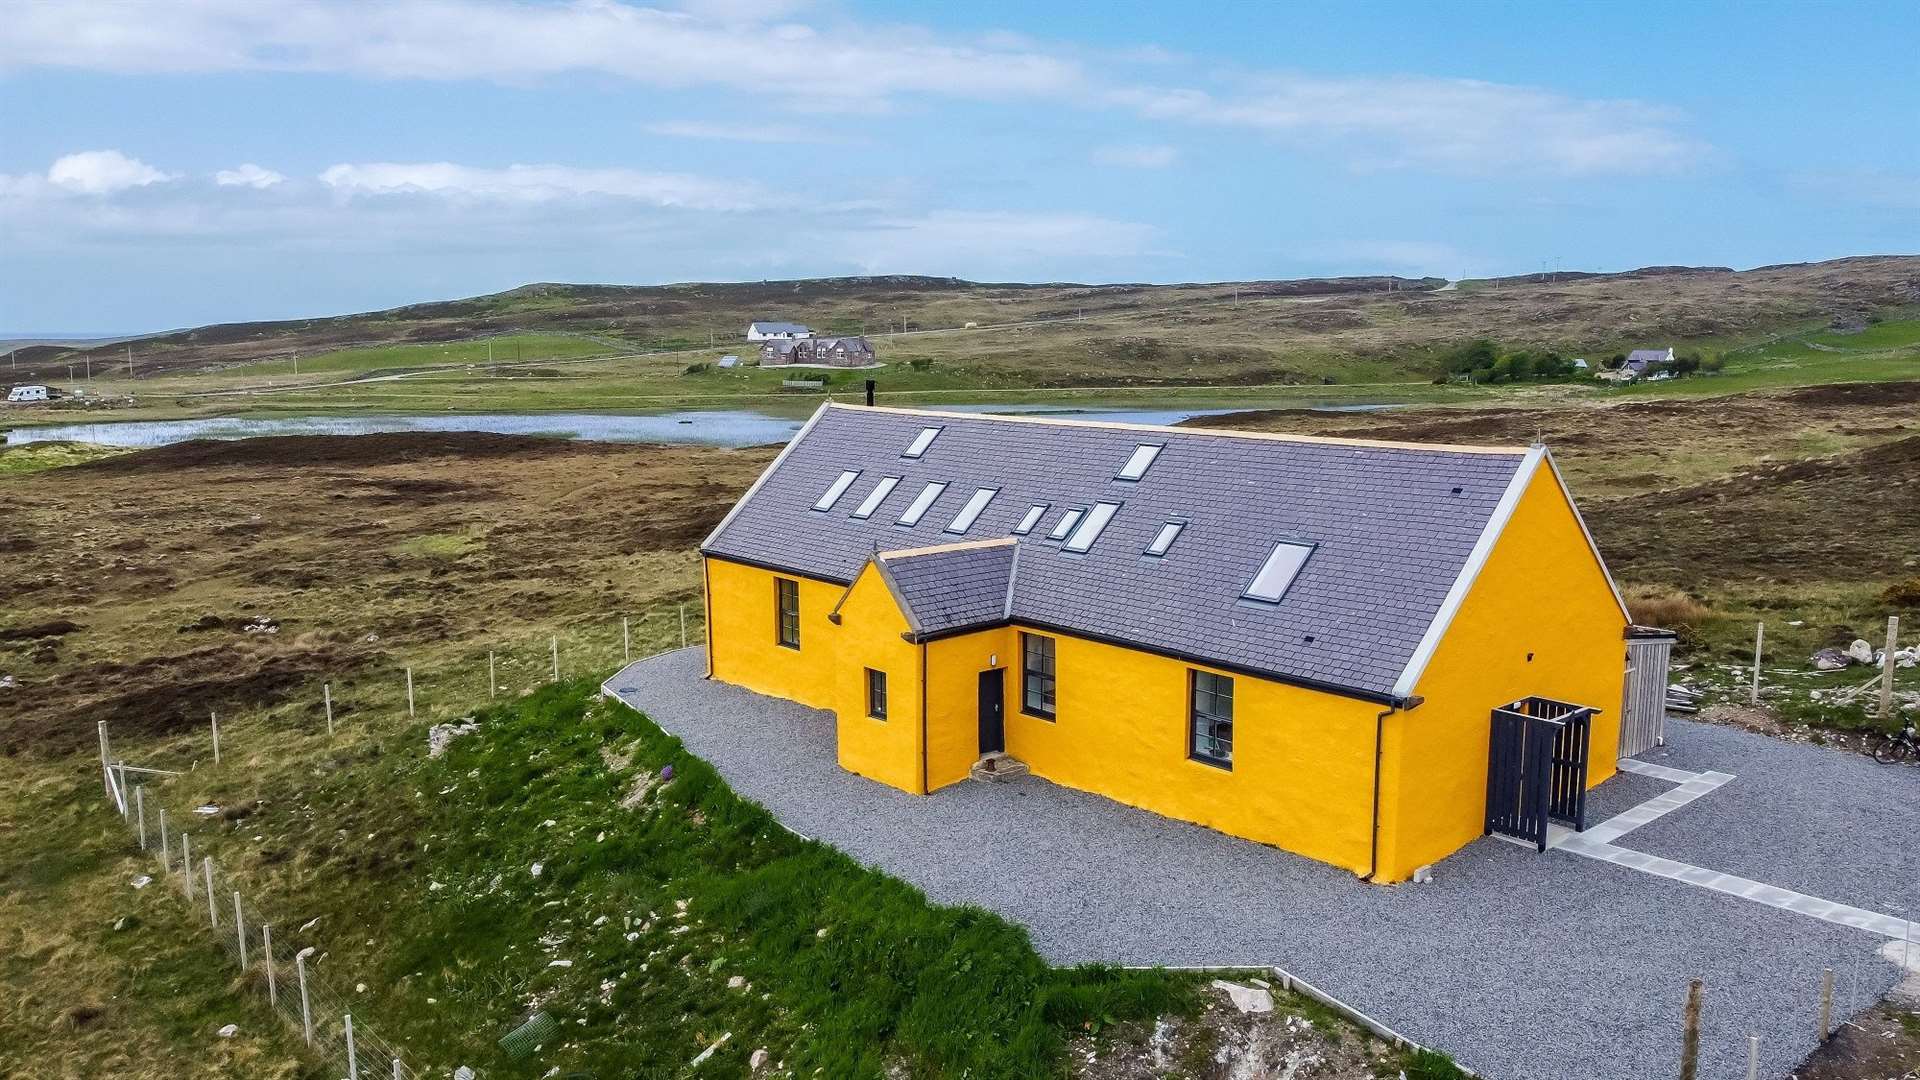 Situated in the Assynt-Coigach National Scenic Area, the hostel has stunning views. Picture: Galbraith